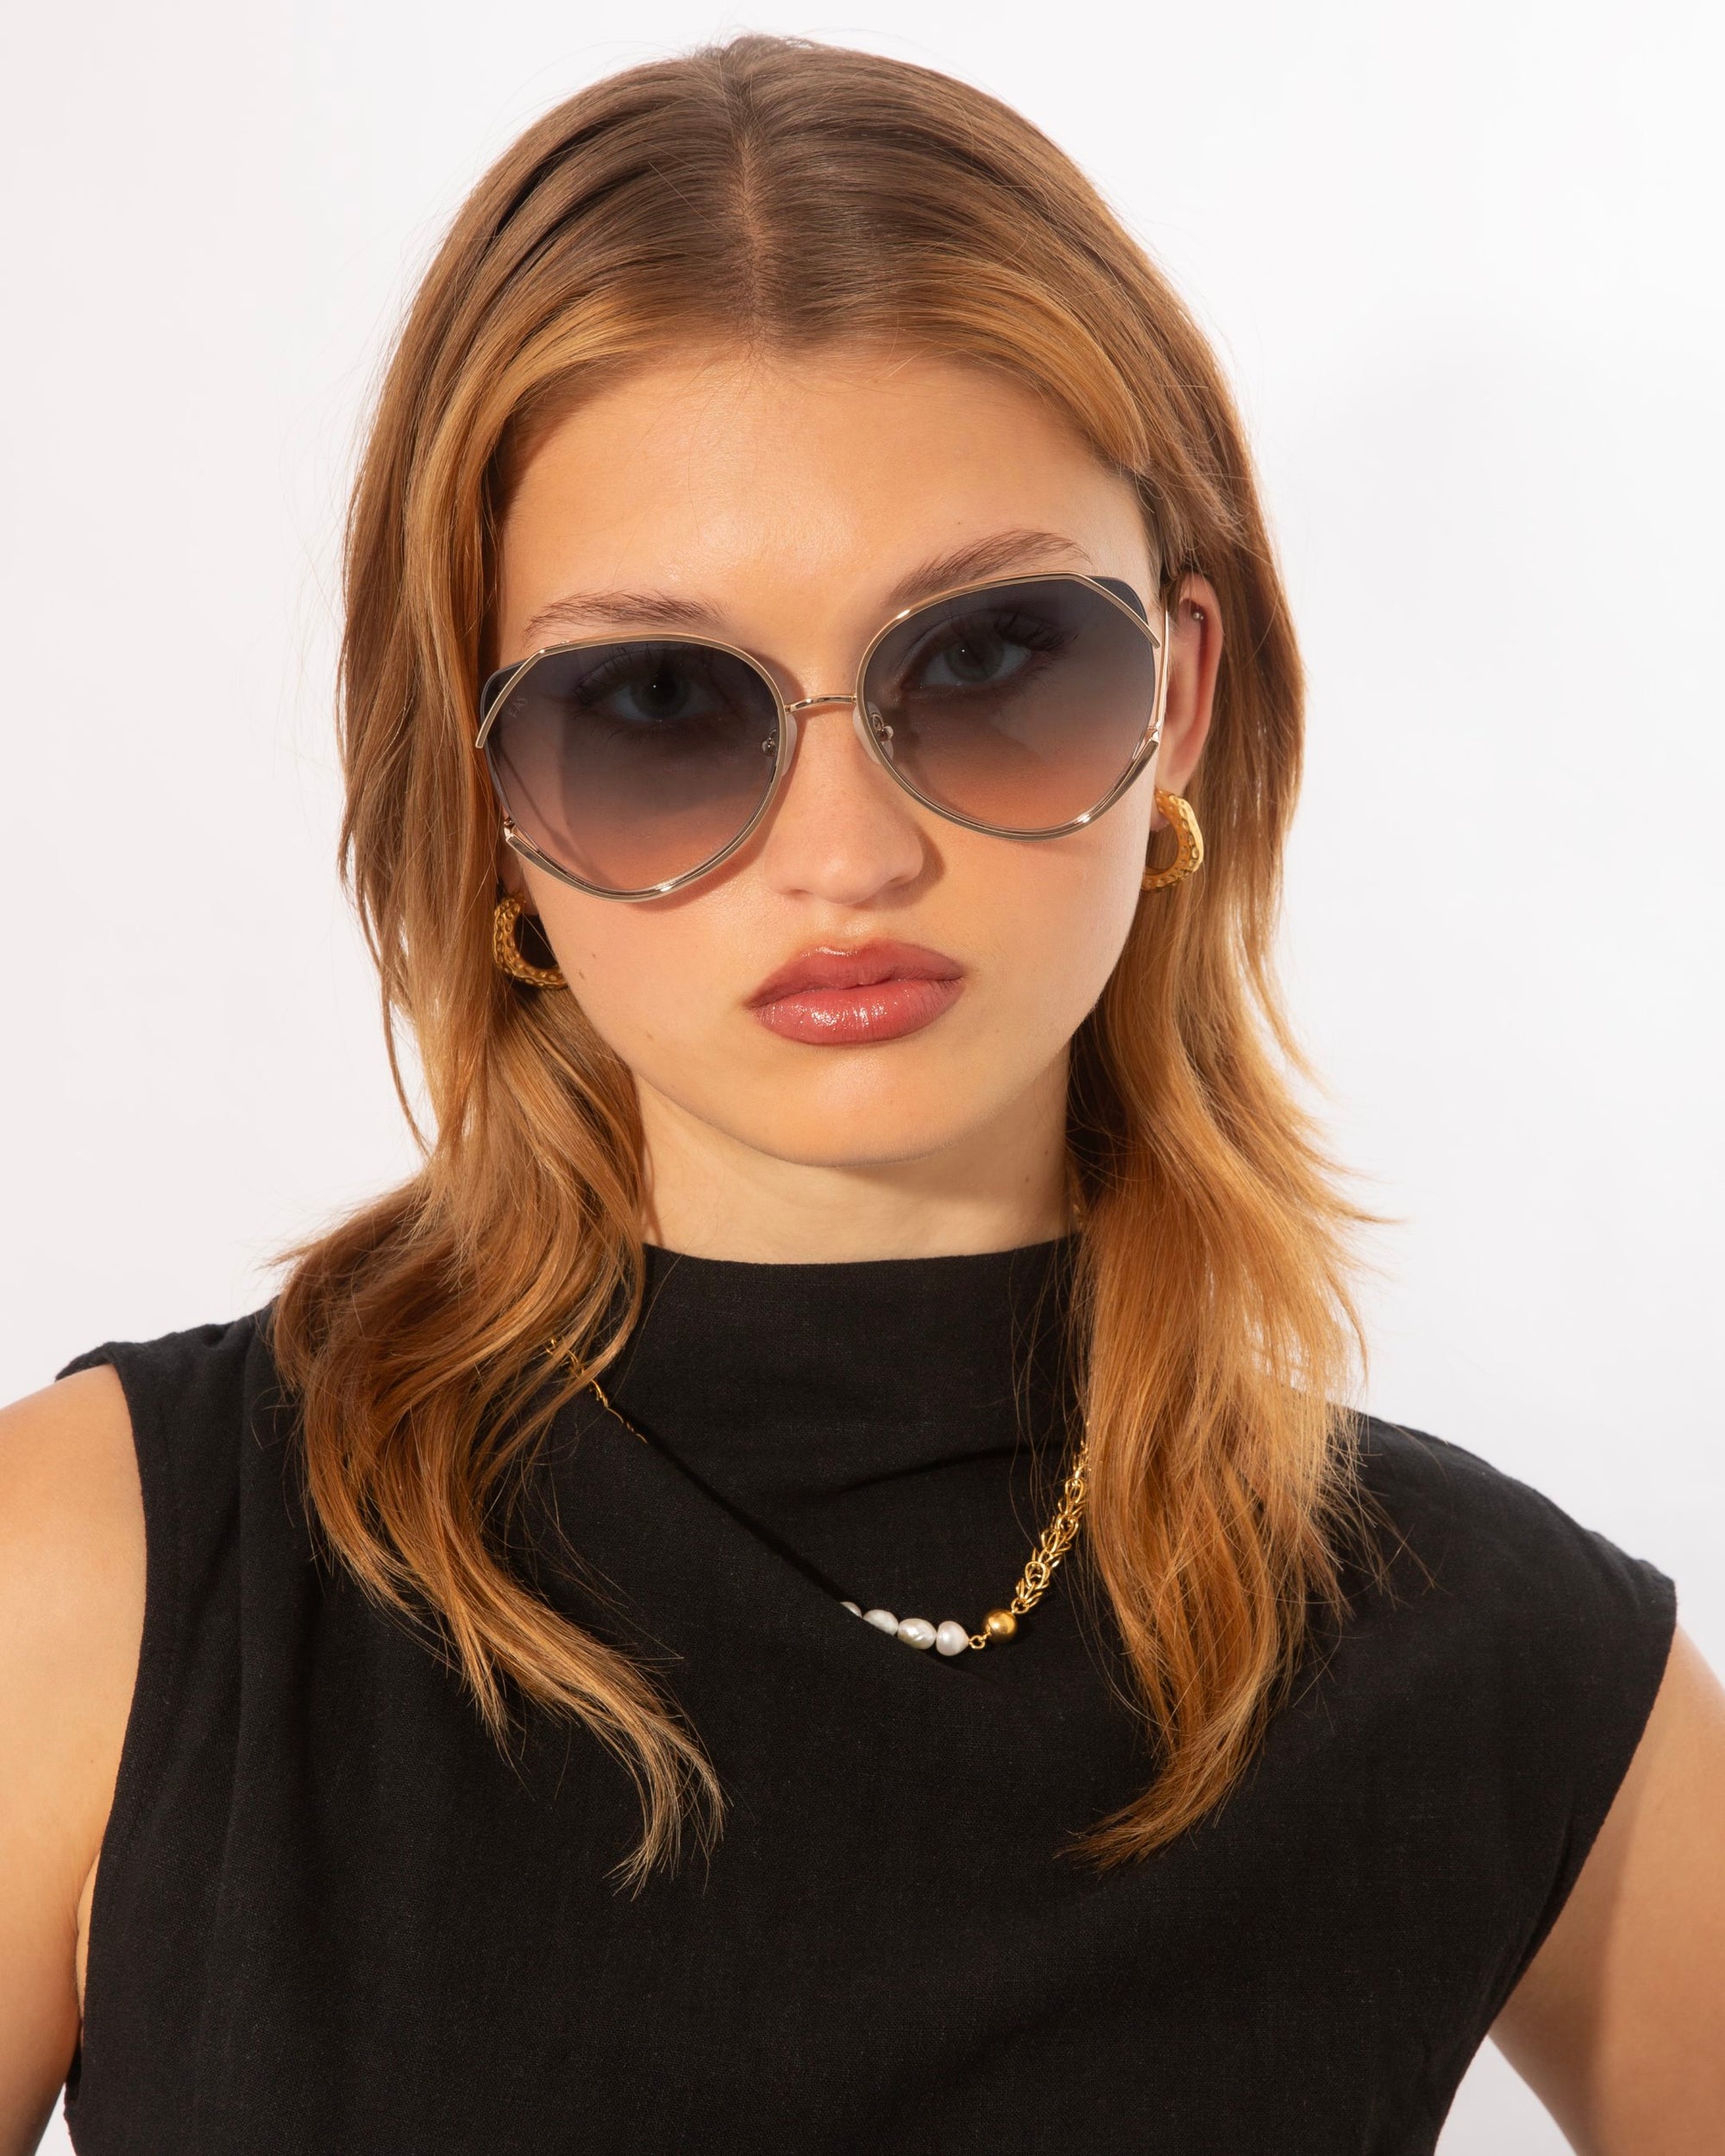 A woman with shoulder-length light brown hair is wearing large, round, dark sunglasses that offer 100% UV protection. She has a neutral expression and is dressed in a sleeveless black top with a gold necklace featuring a single white pearl. Her golden hoop earrings complement the ultralightweight design of her Wonderland by For Art&#39;s Sake® eyewear. The background is white.